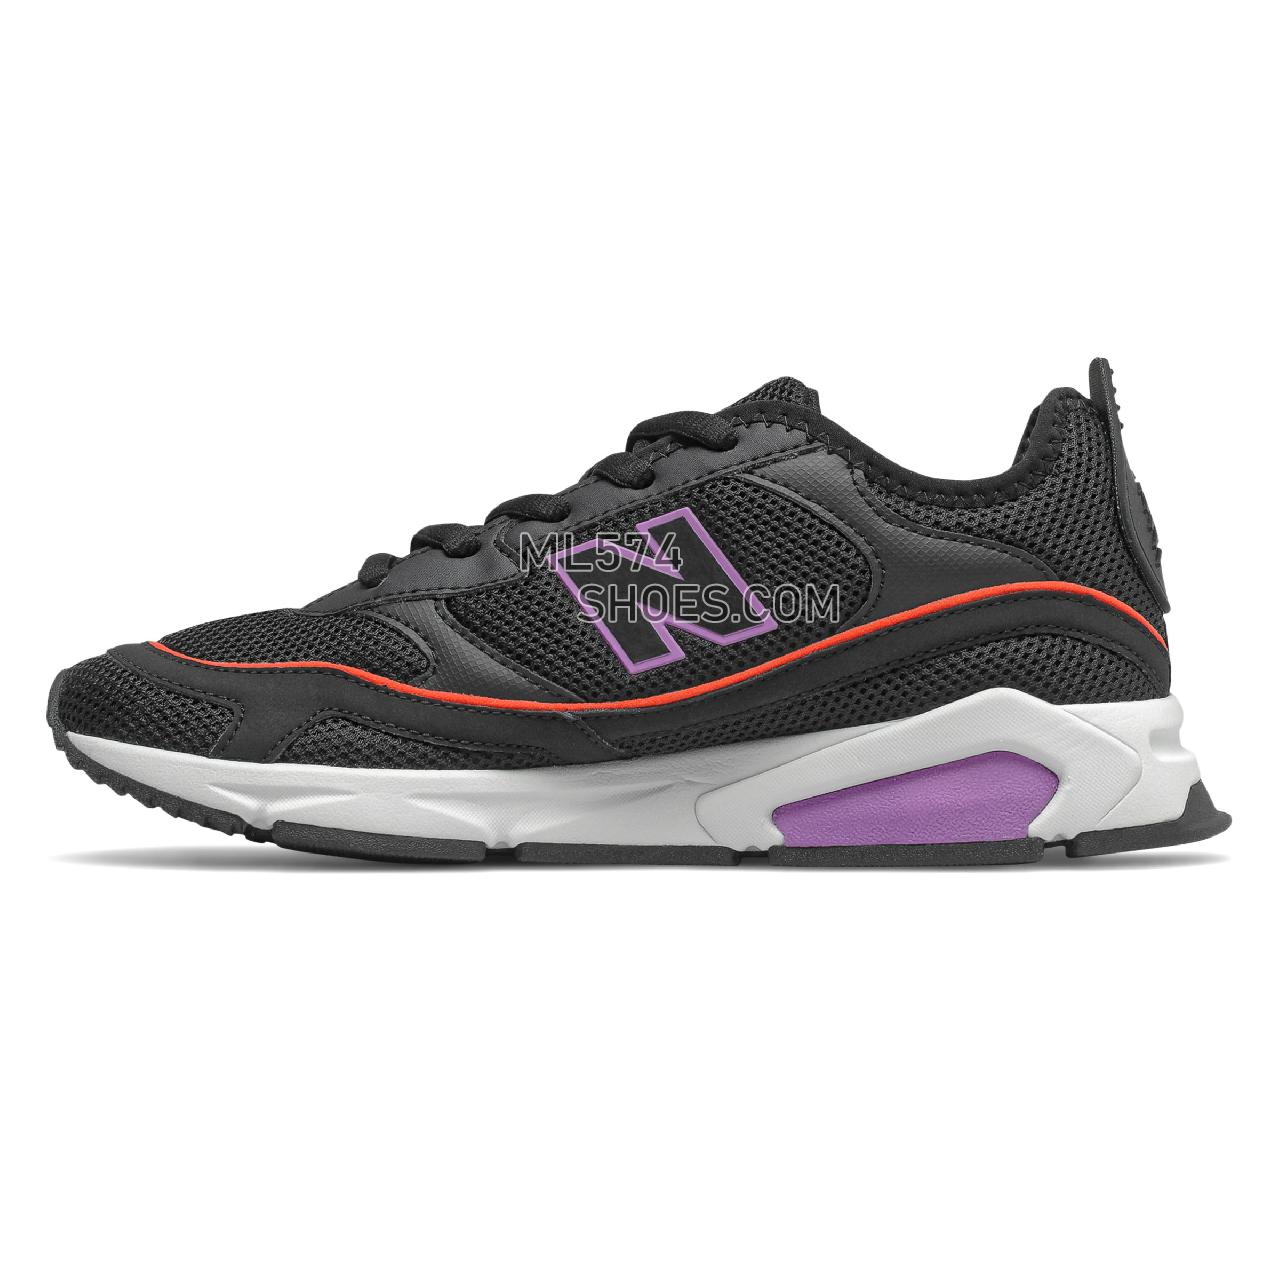 New Balance X-Racer - Women's Sport Style Sneakers - Black with Neo Violet - WSXRCNTB